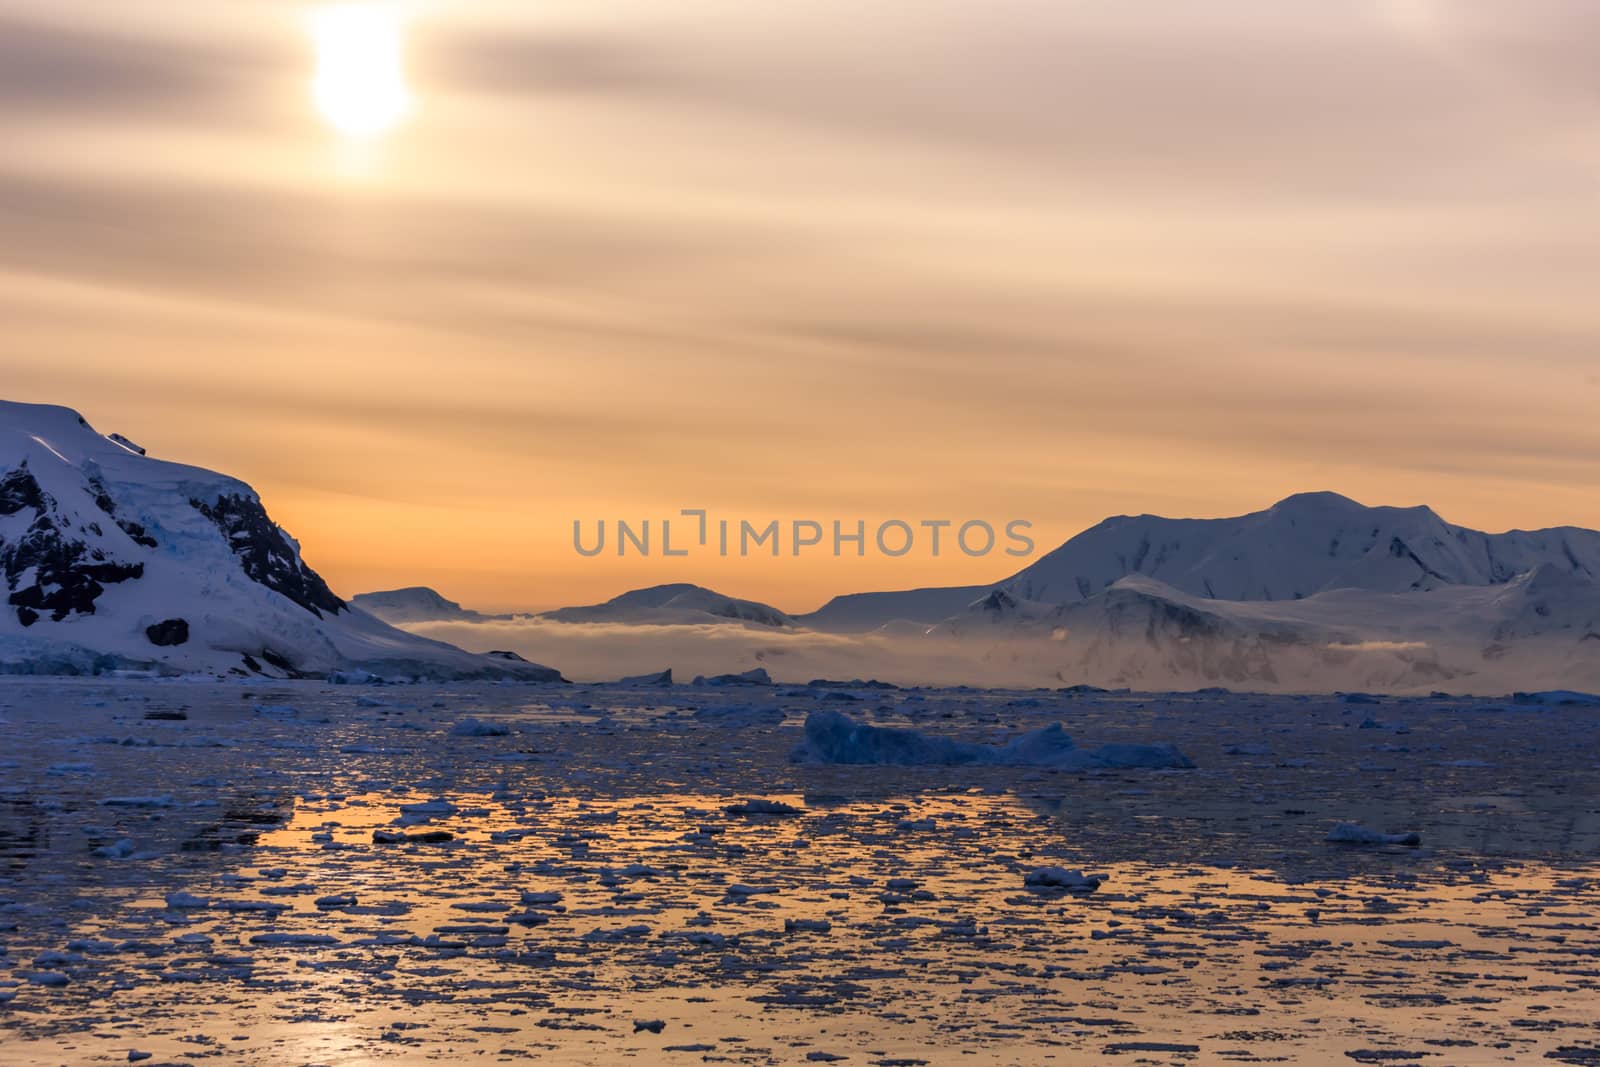 Sunset over the mountains and icebergs at Lemaire Strait, Antarctica